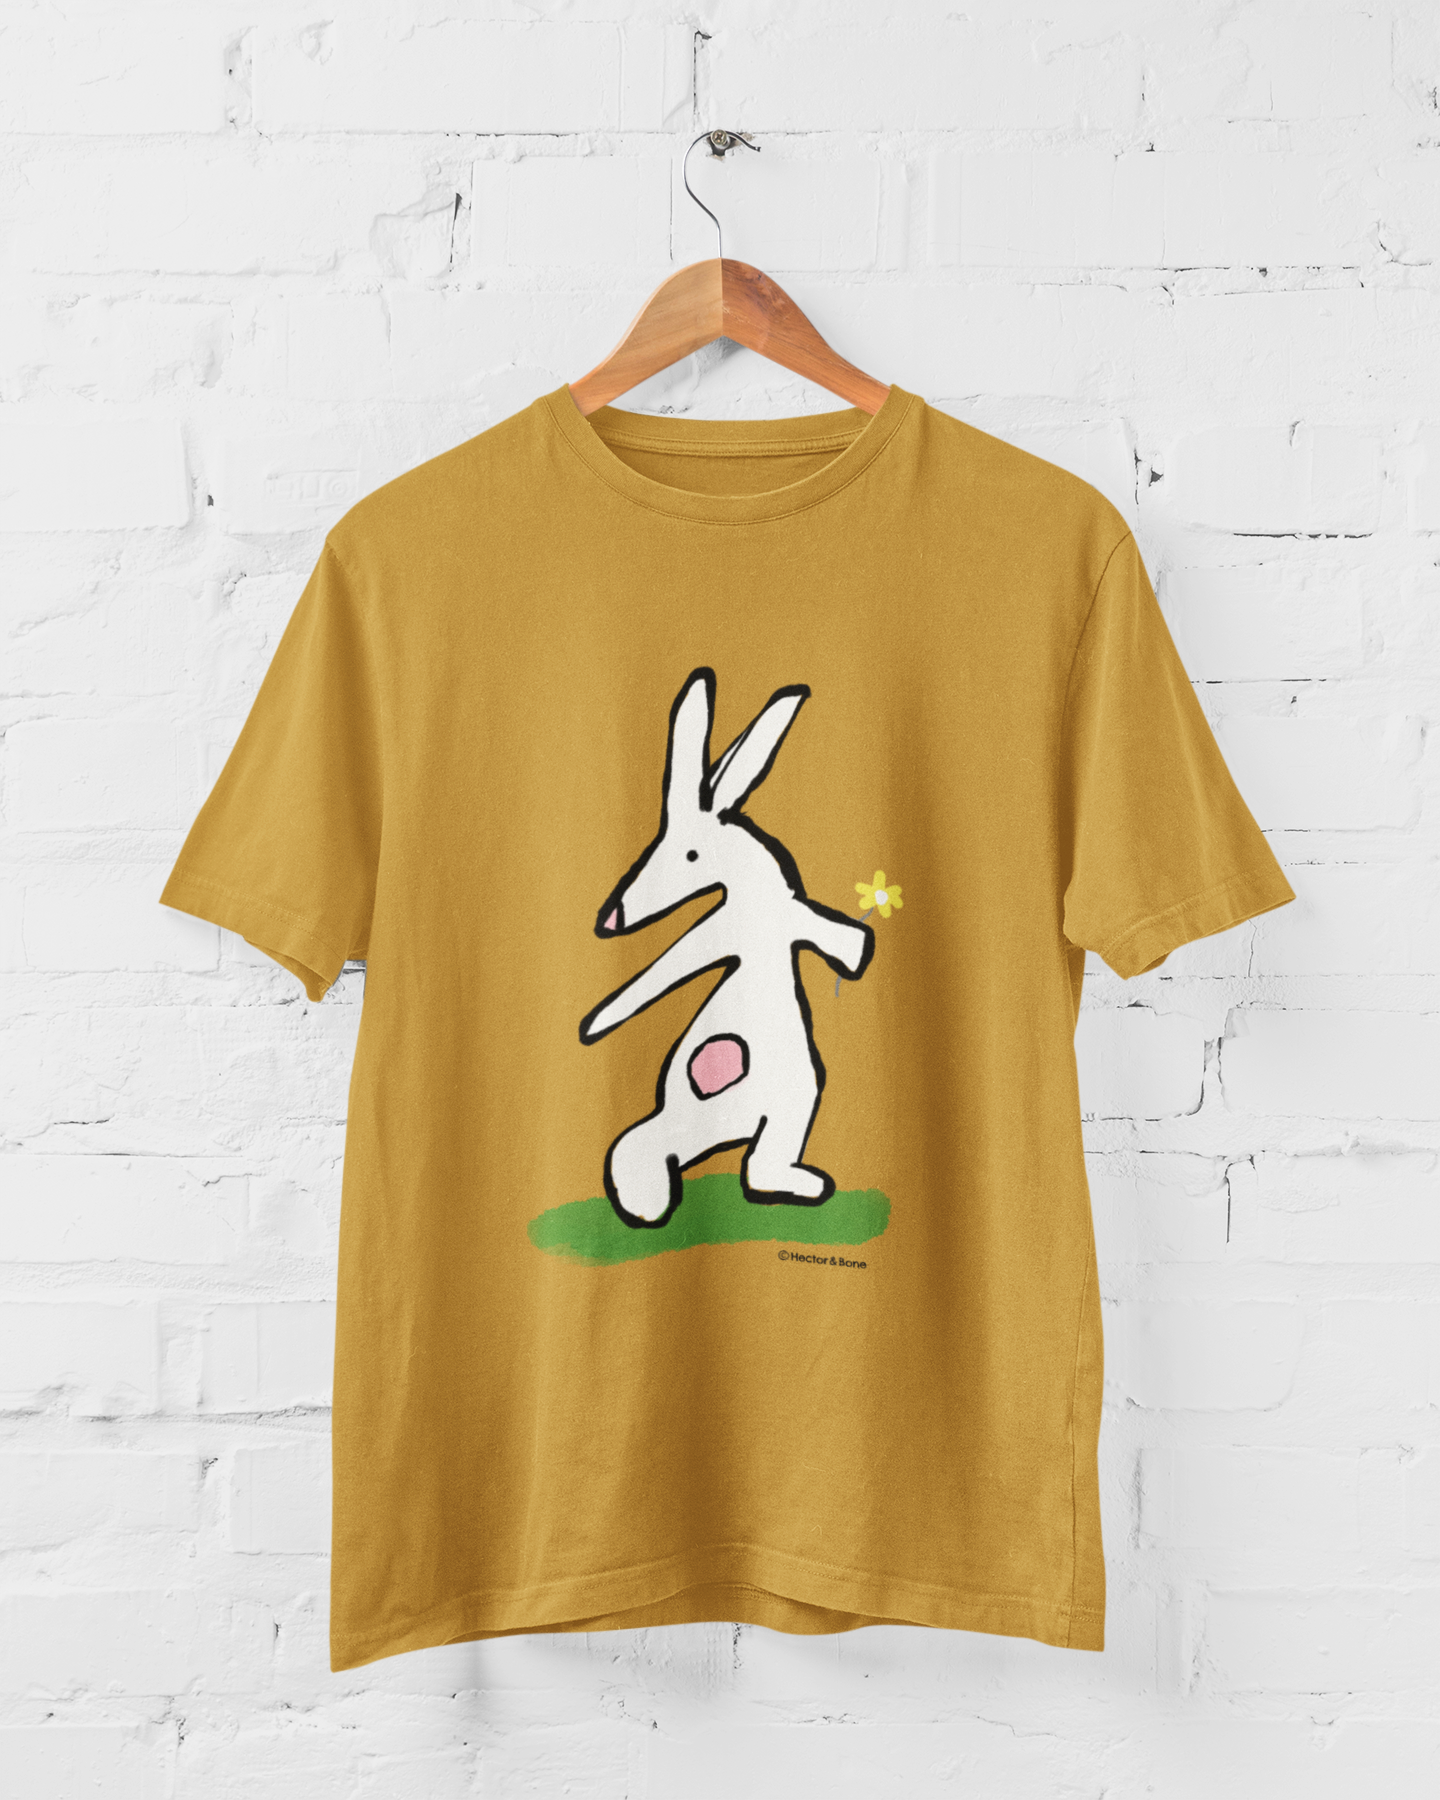 Bunny T-shirt - Illustrated rabbit holding a flower design on ochre colour vegan cotton - Easter Bunny t-shirts by Hector and Bone